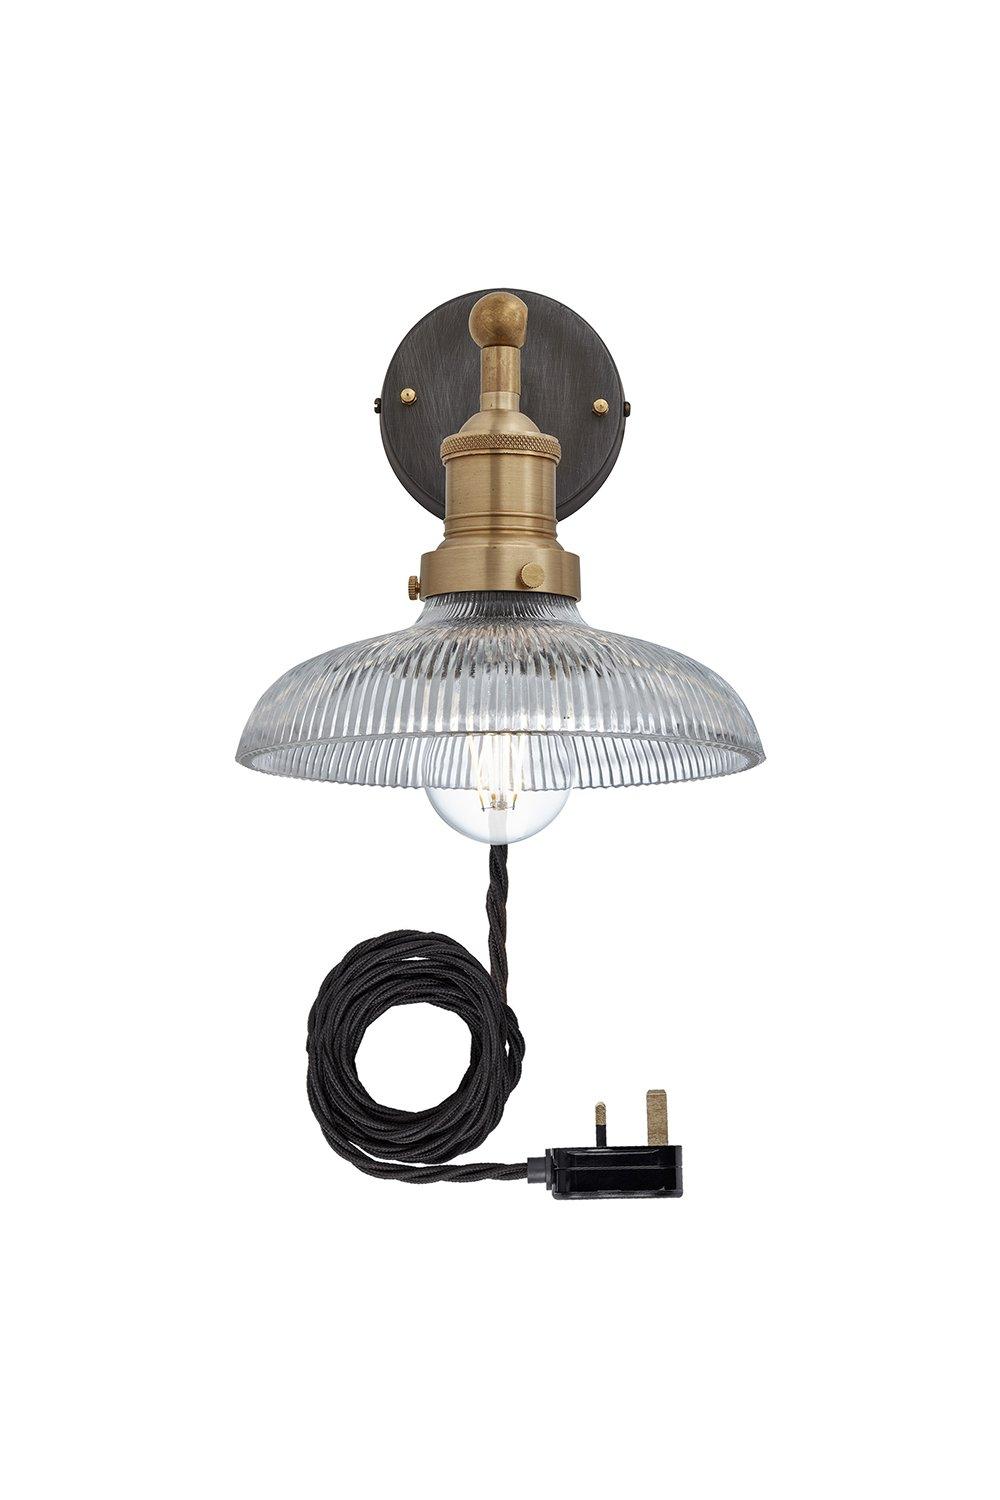 Brooklyn Glass Dome Wall Light, 8 Inch, Brass Holder With Plug